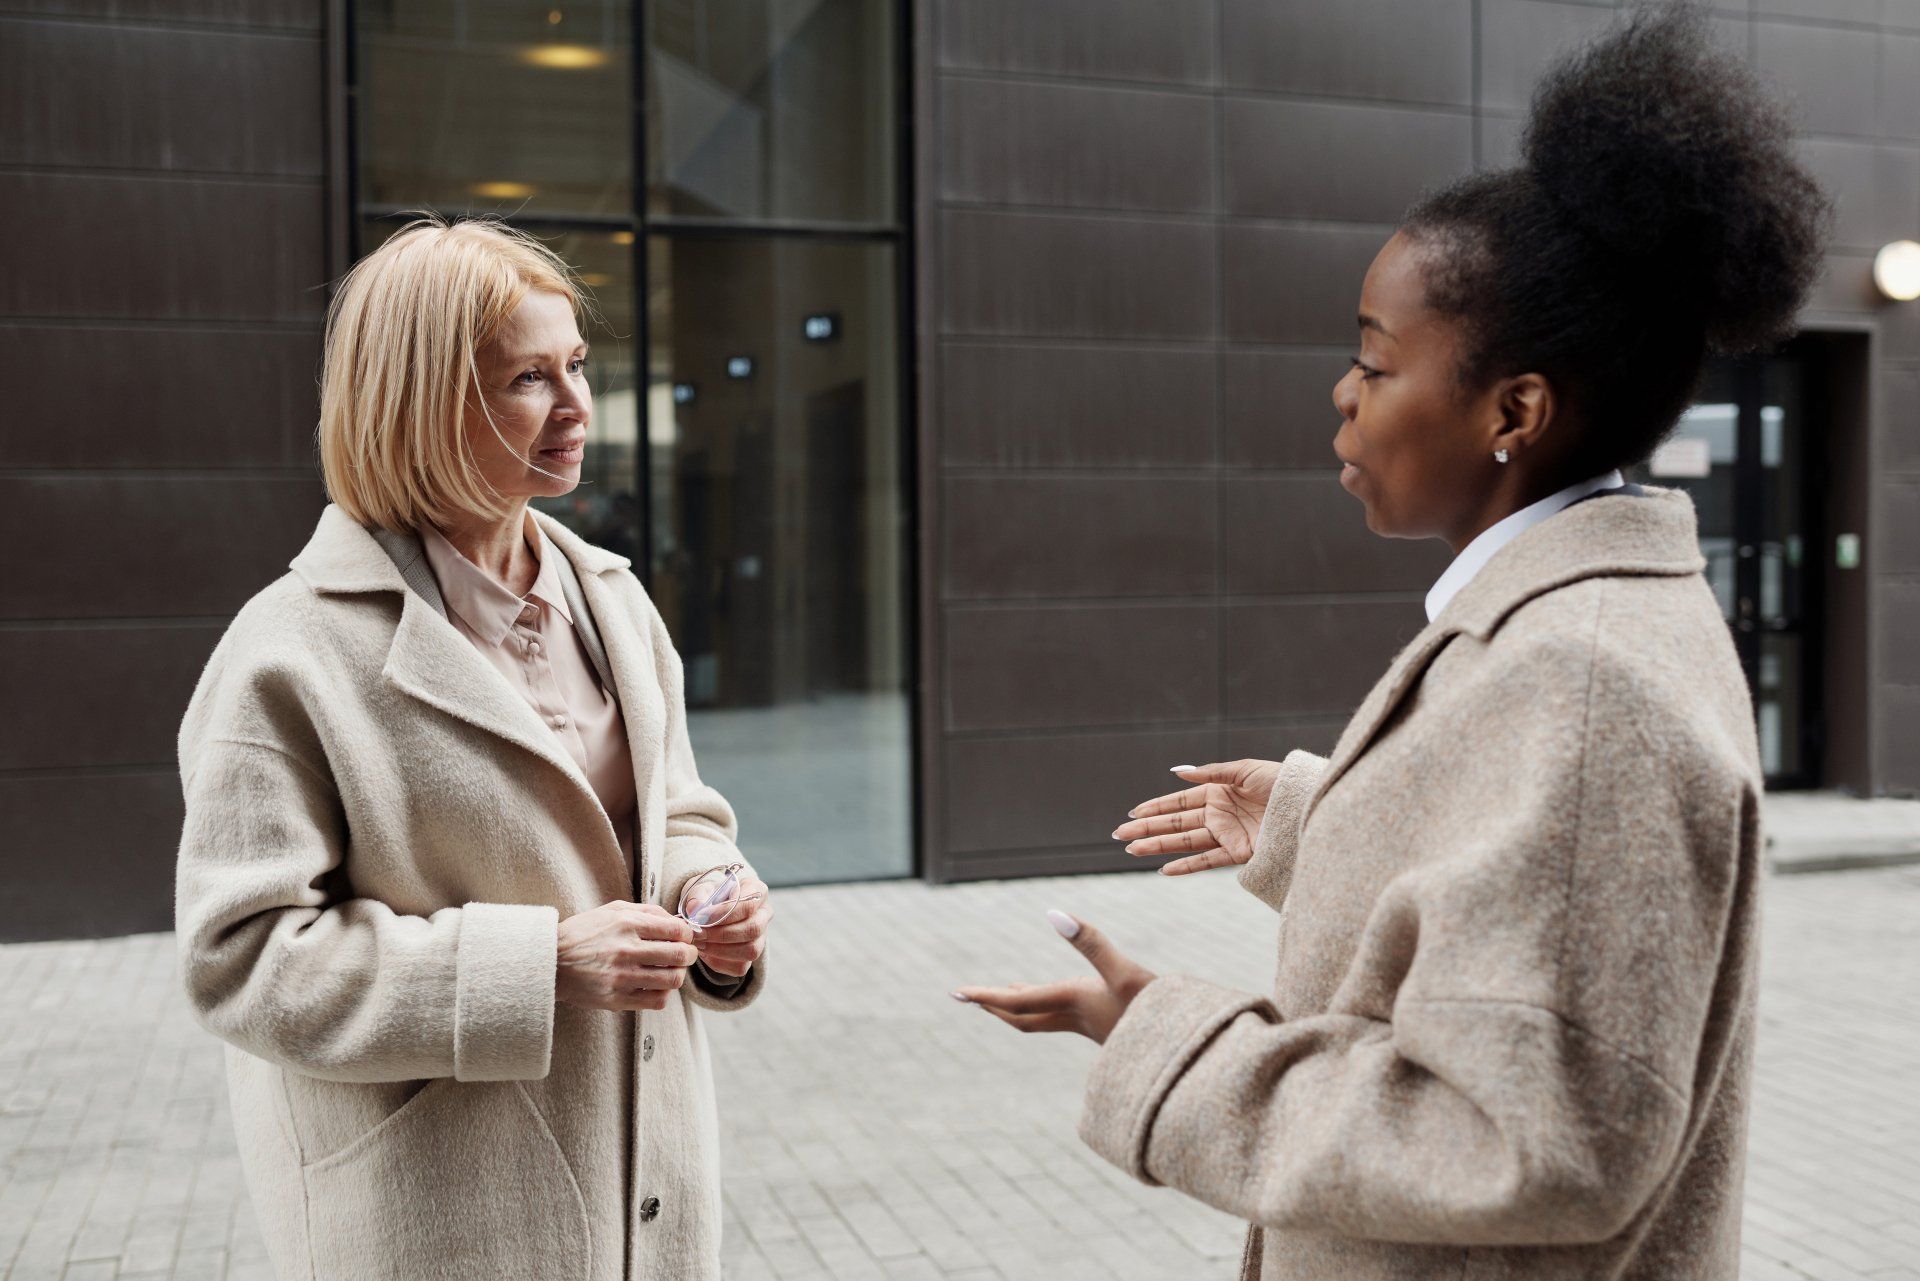 Two women are conversing in front of a building.